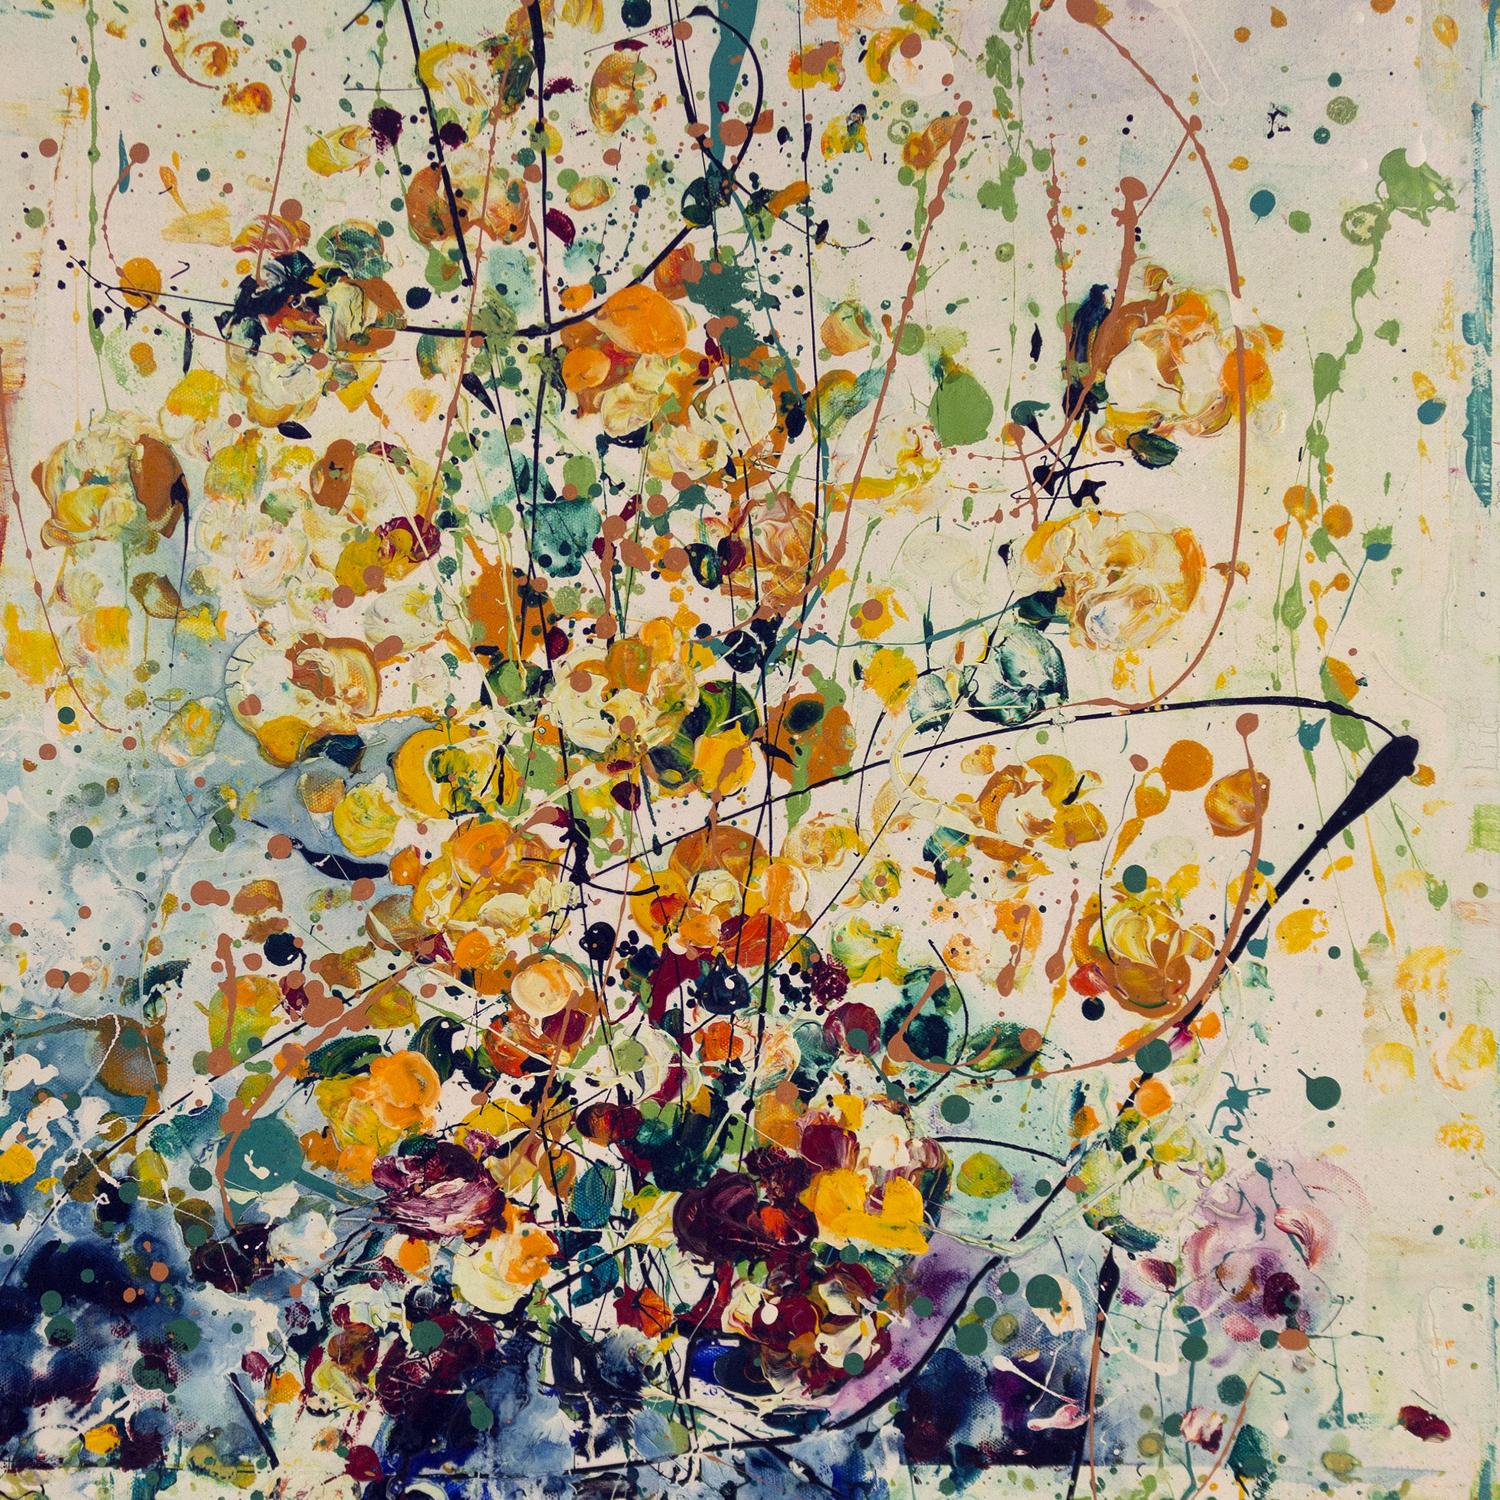 Binyamin Basteker
The sounds of flowers , 2020
oil on canvas  
80 x 60 cm
31 x 24 in

Exhibited: 